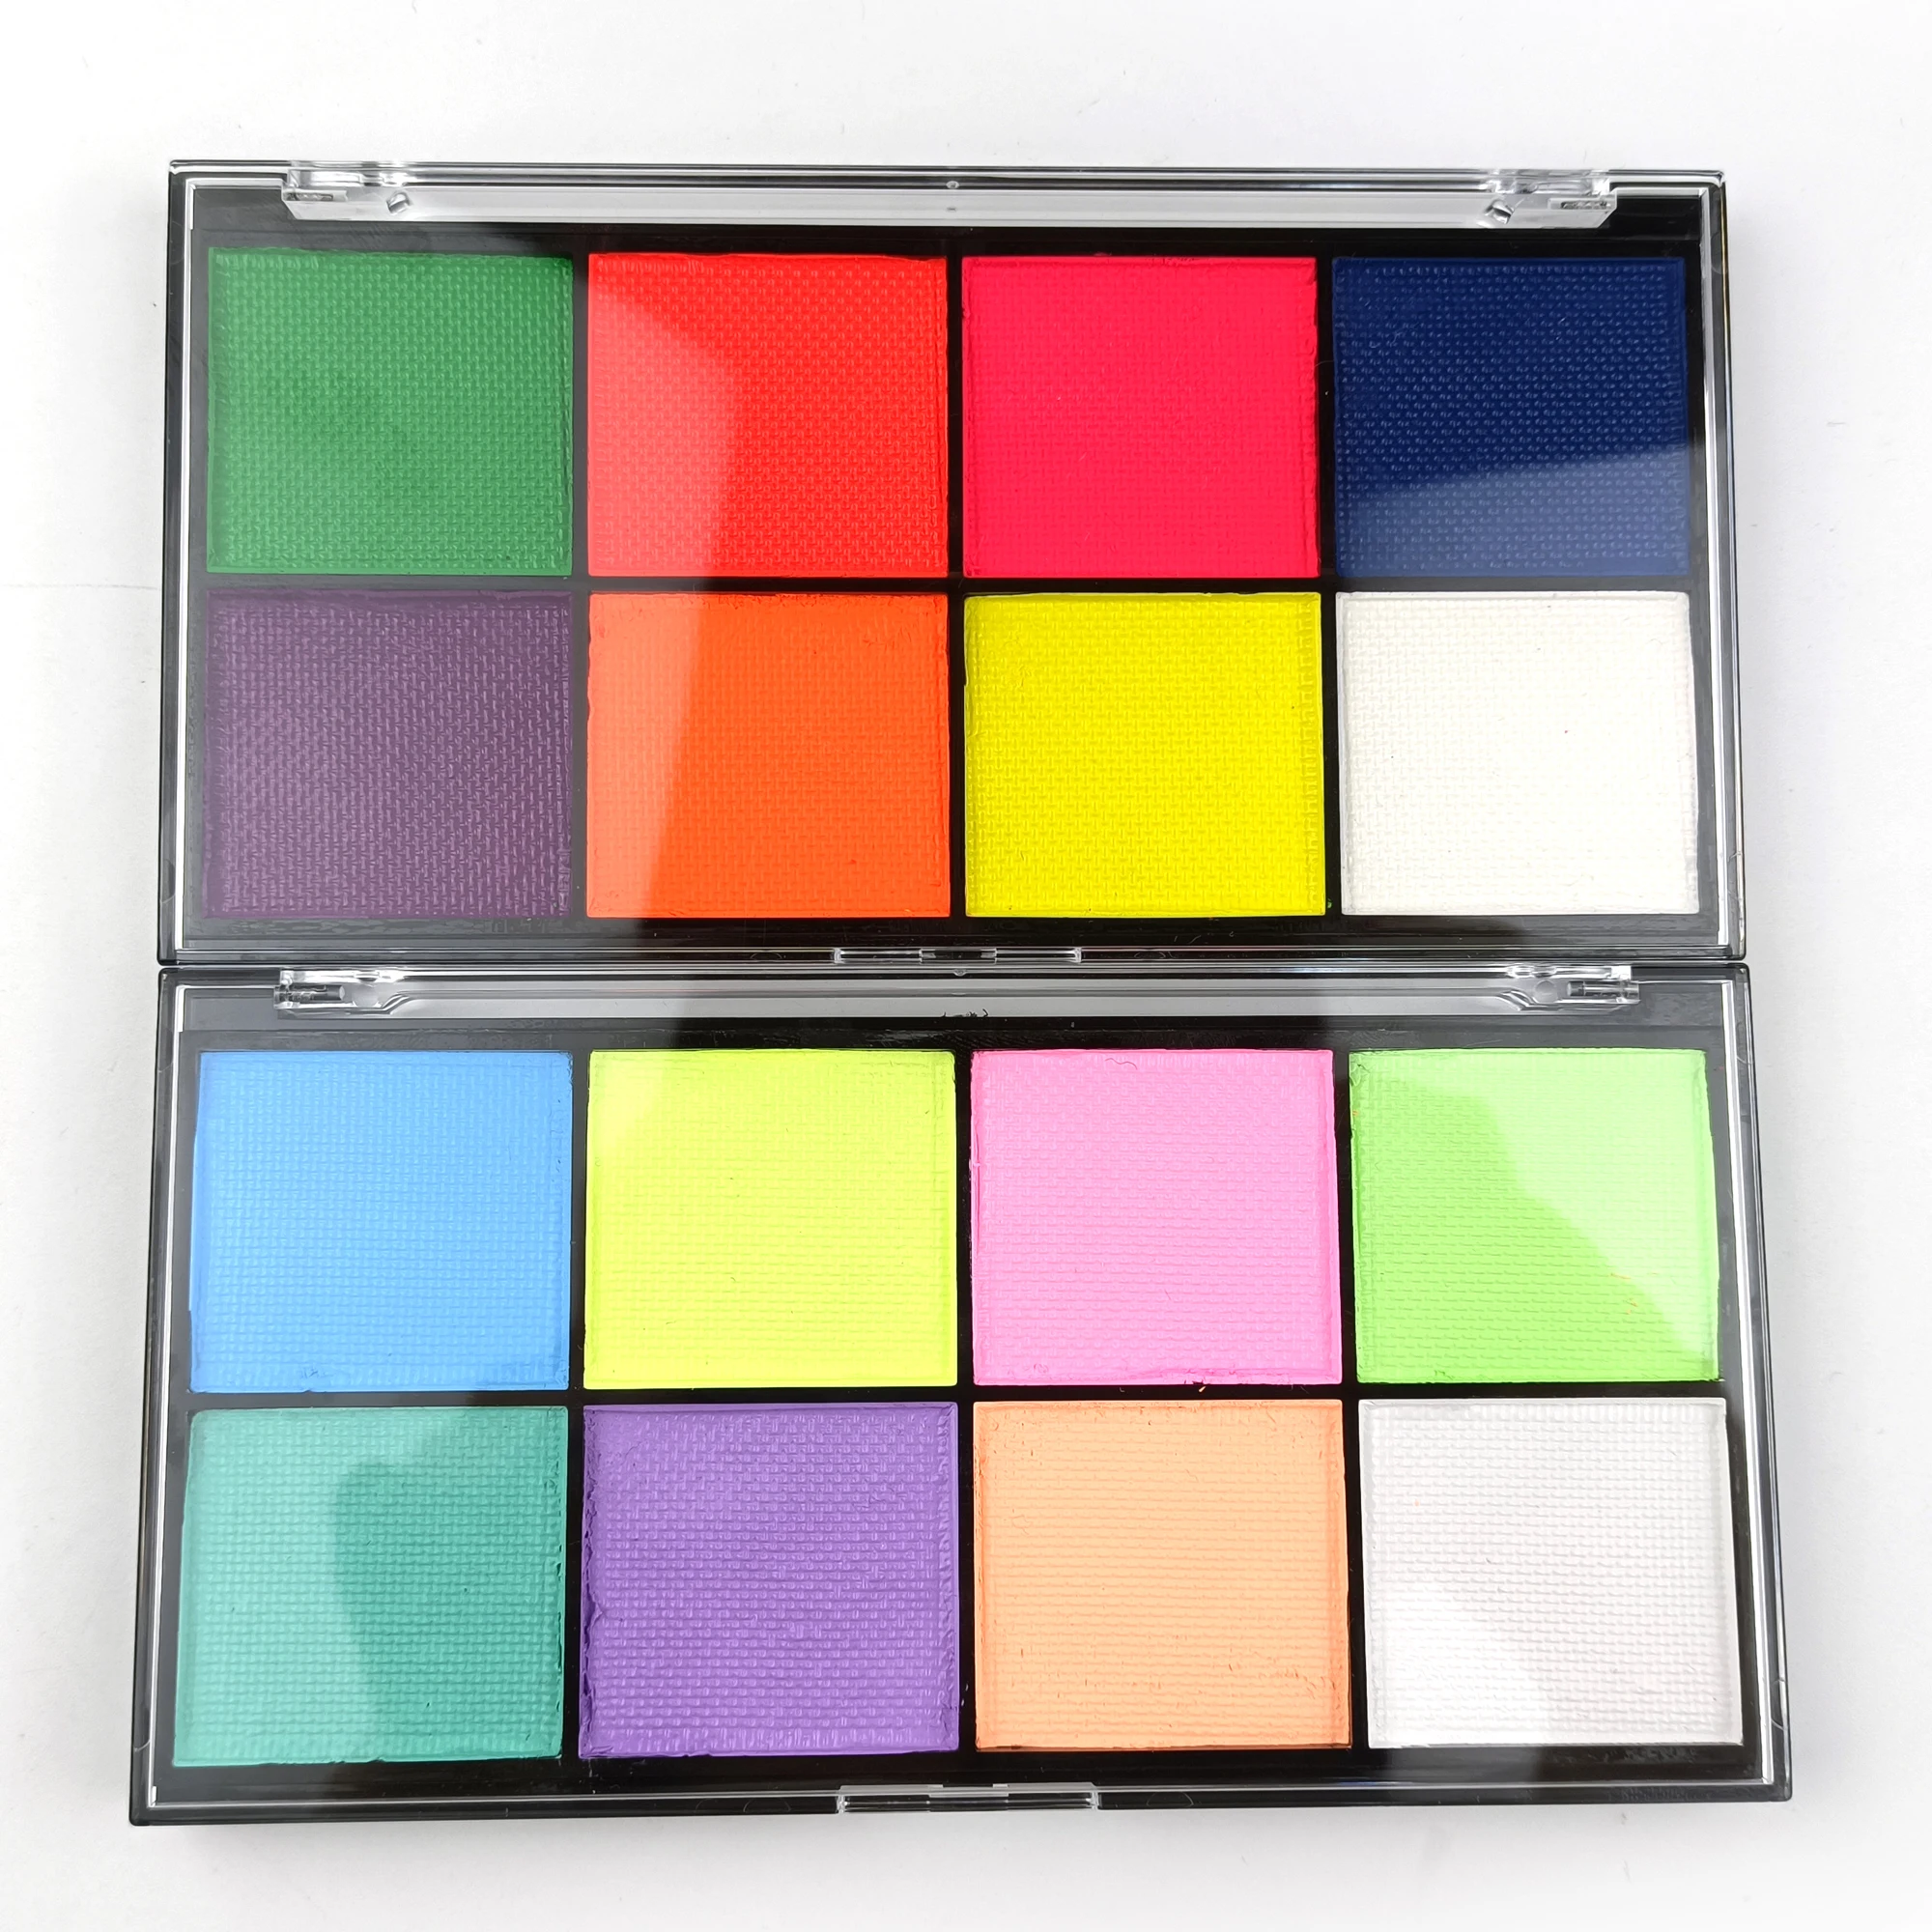 Wholesale High quality water eyeliner palette 2 colors eyeliner gel palette with private label From m.alibaba.com